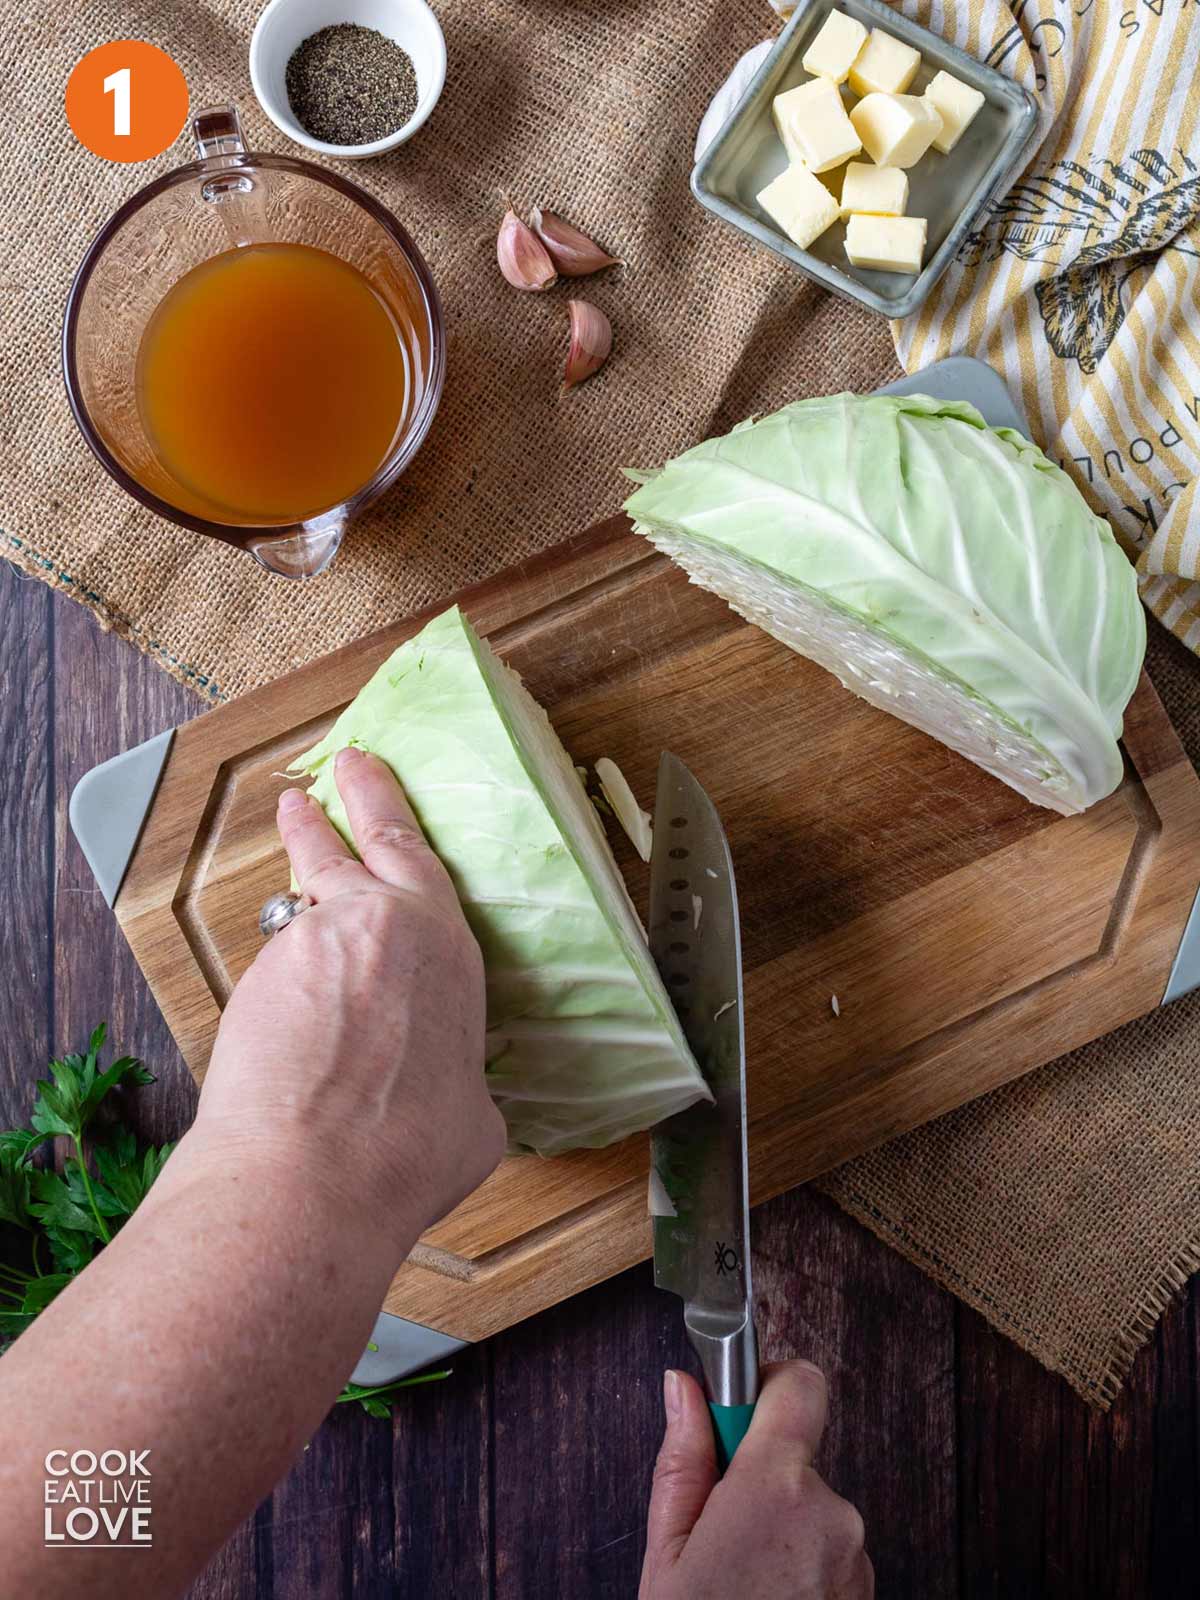 Head of cabbage cut in half with a knife on a cutting board.